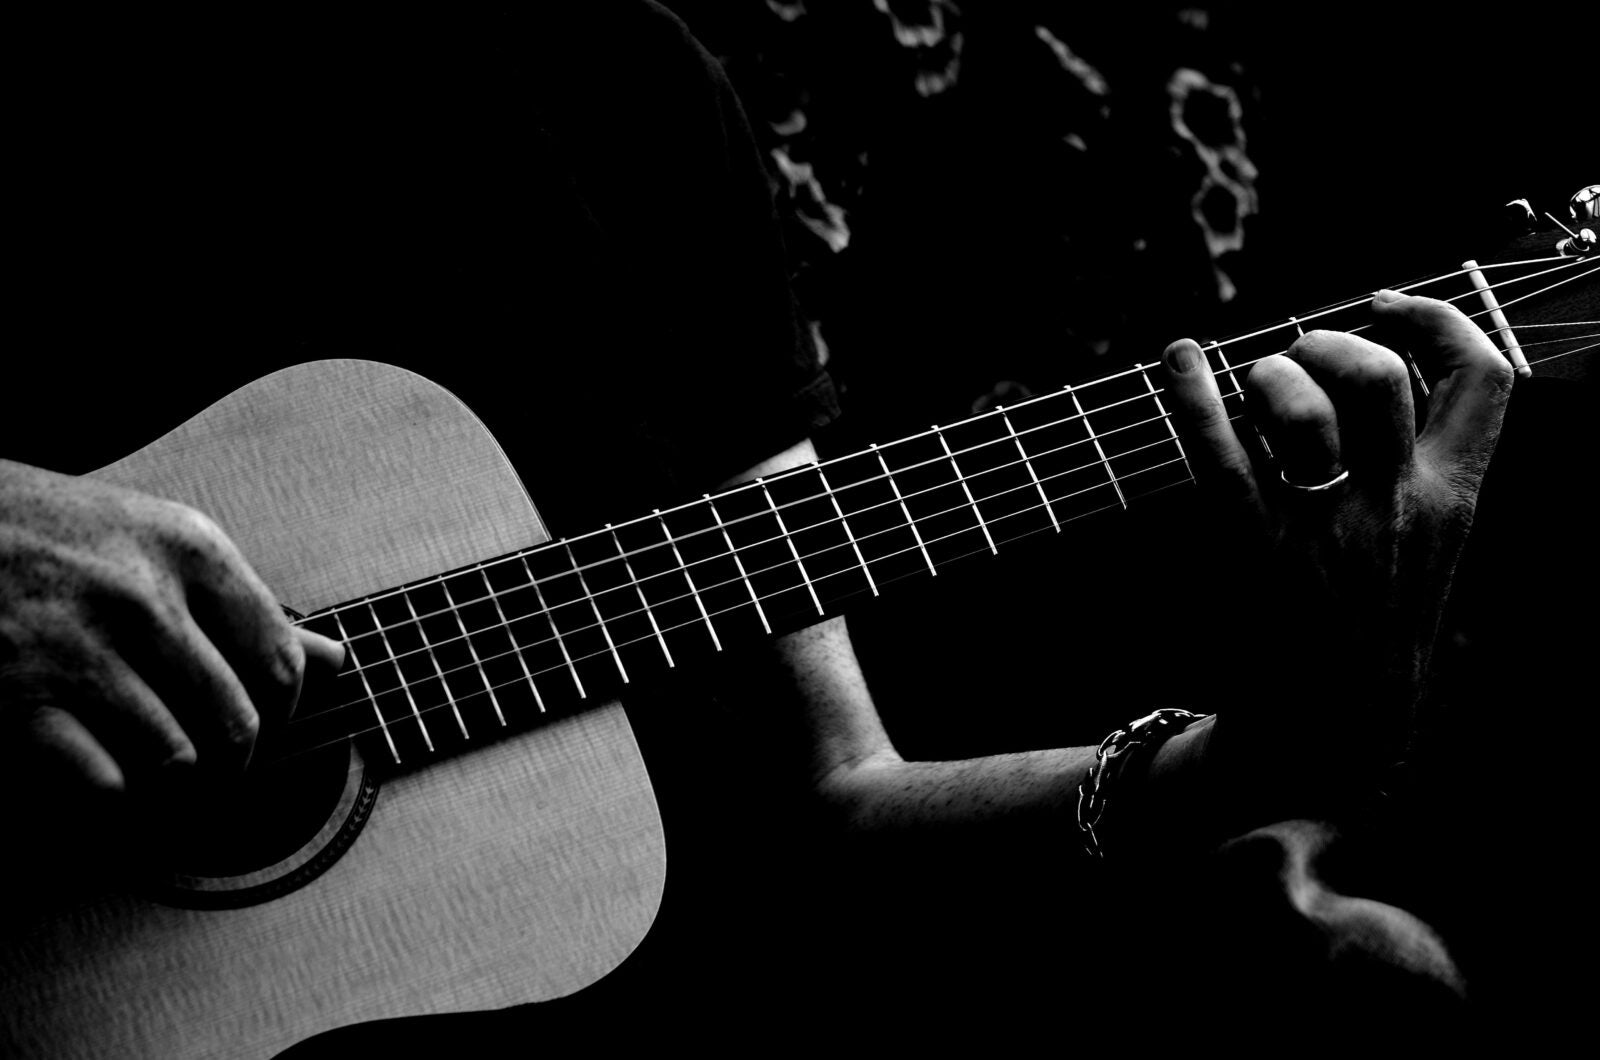 A black and white image. A man playing the guitar